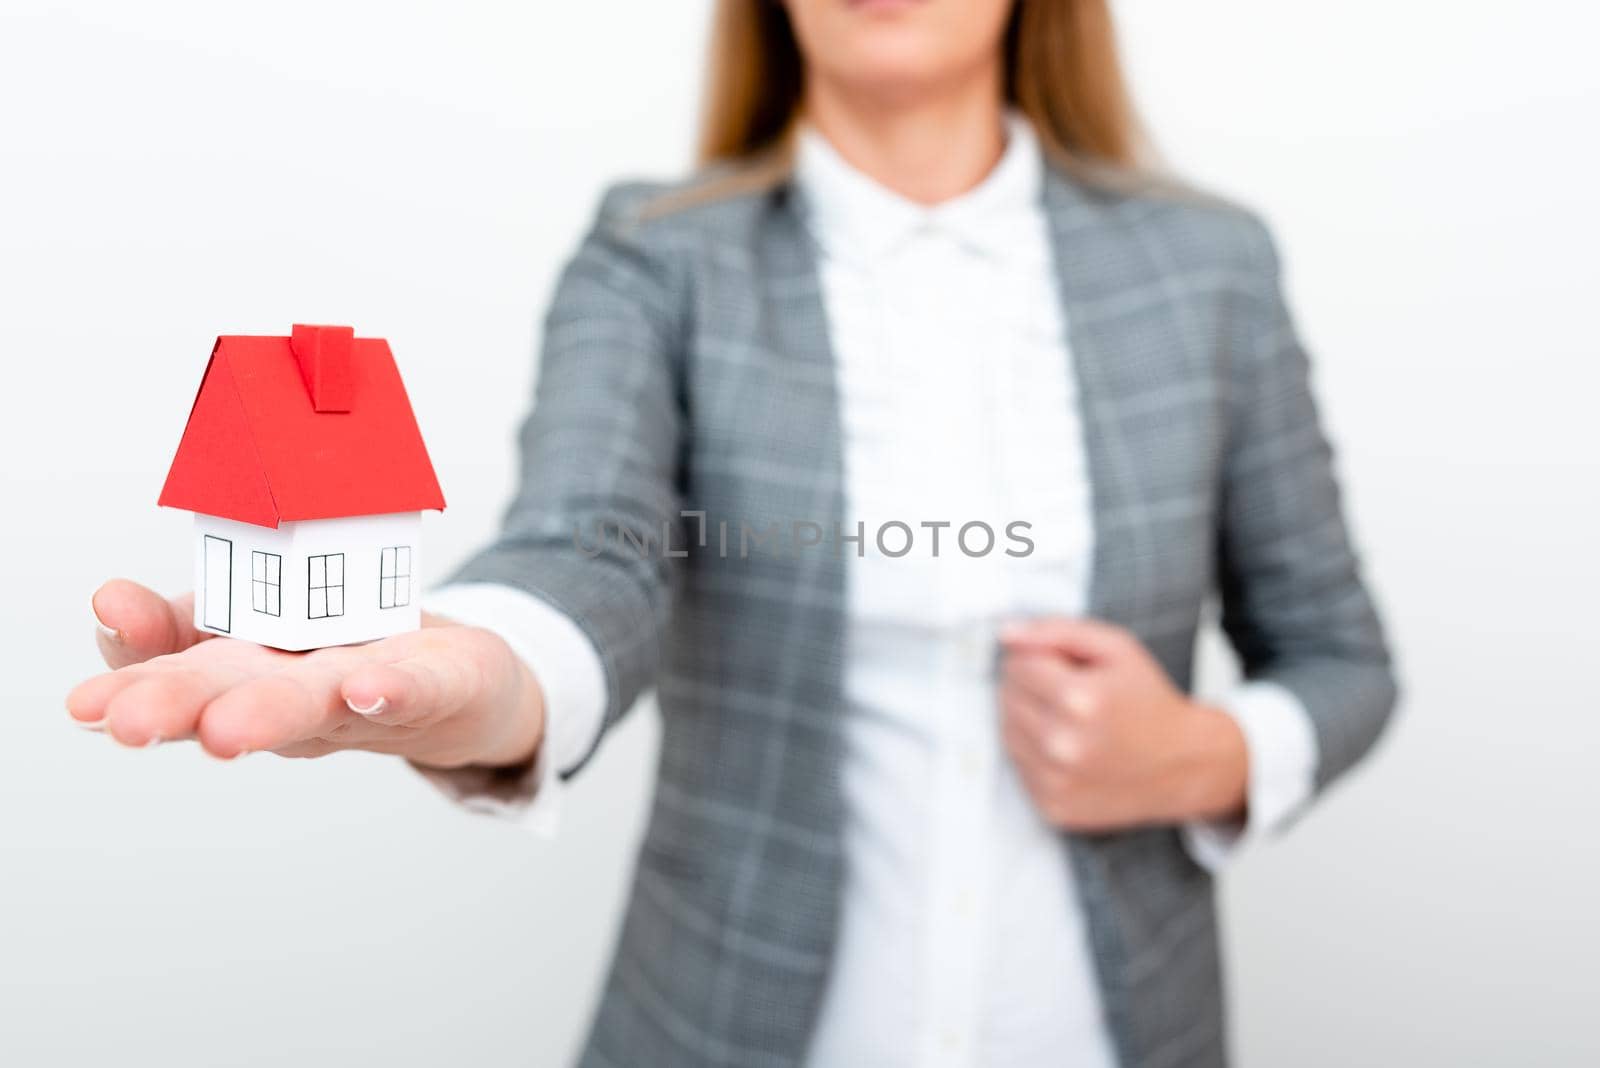 Holding Your new house in hands against spring green background. Real estate and healthy lifestyle concept by nialowwa